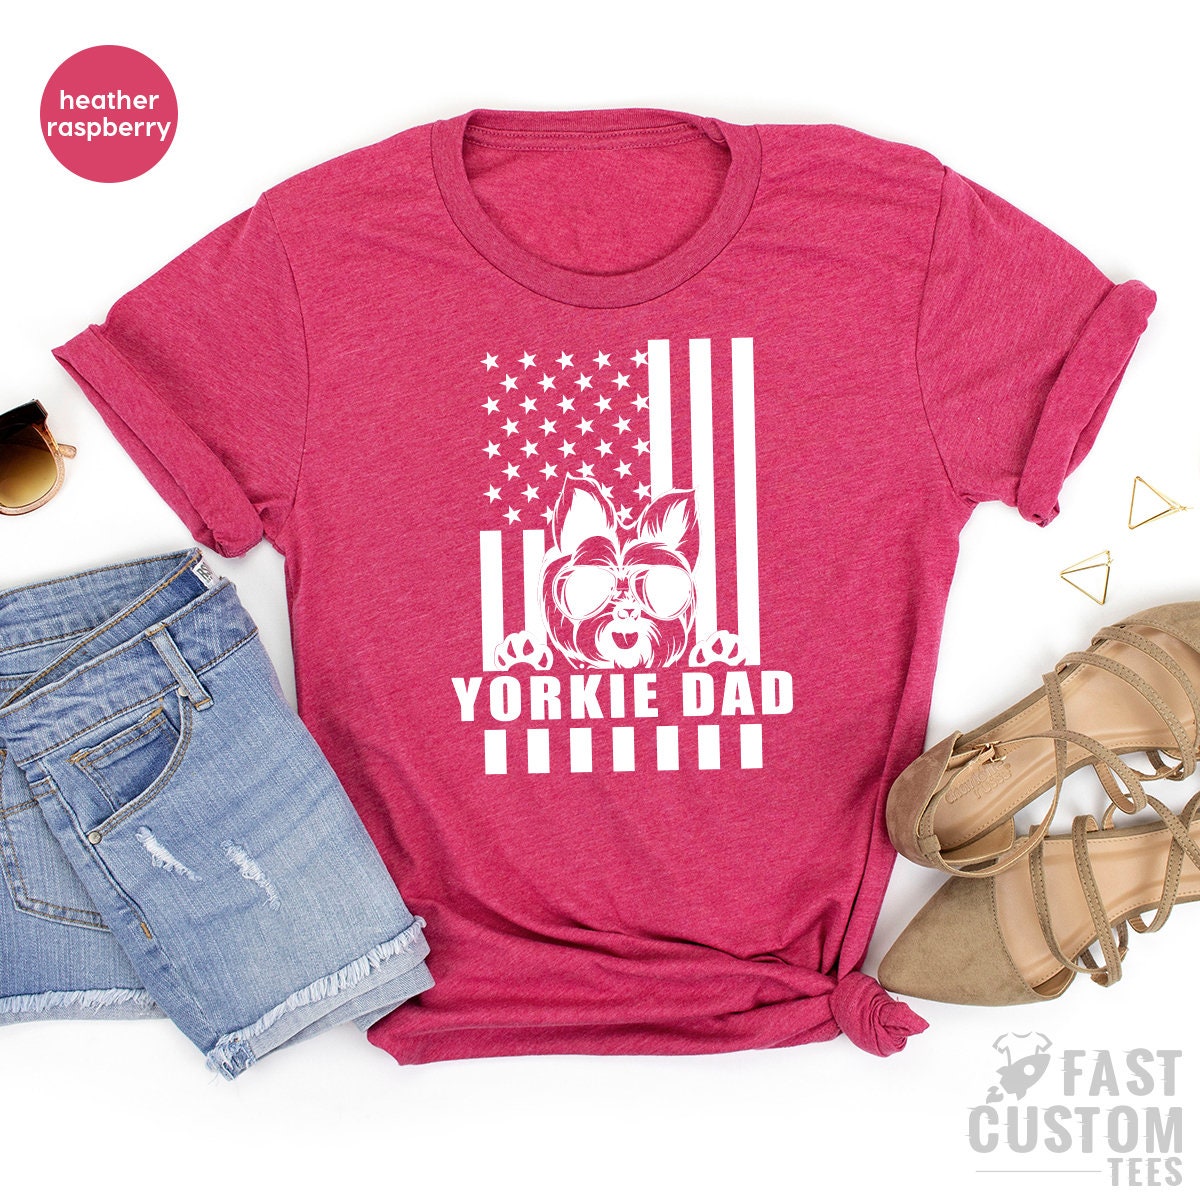 Yorkie Dad Shirt, American Flag With Yorkie, Gift For Pet Dad, Dog Dad Shirt, Yorkie Lover Gift, Best Yorkie Dad Ever Shirt, Yorkie Dad Tee - Fastdeliverytees.com